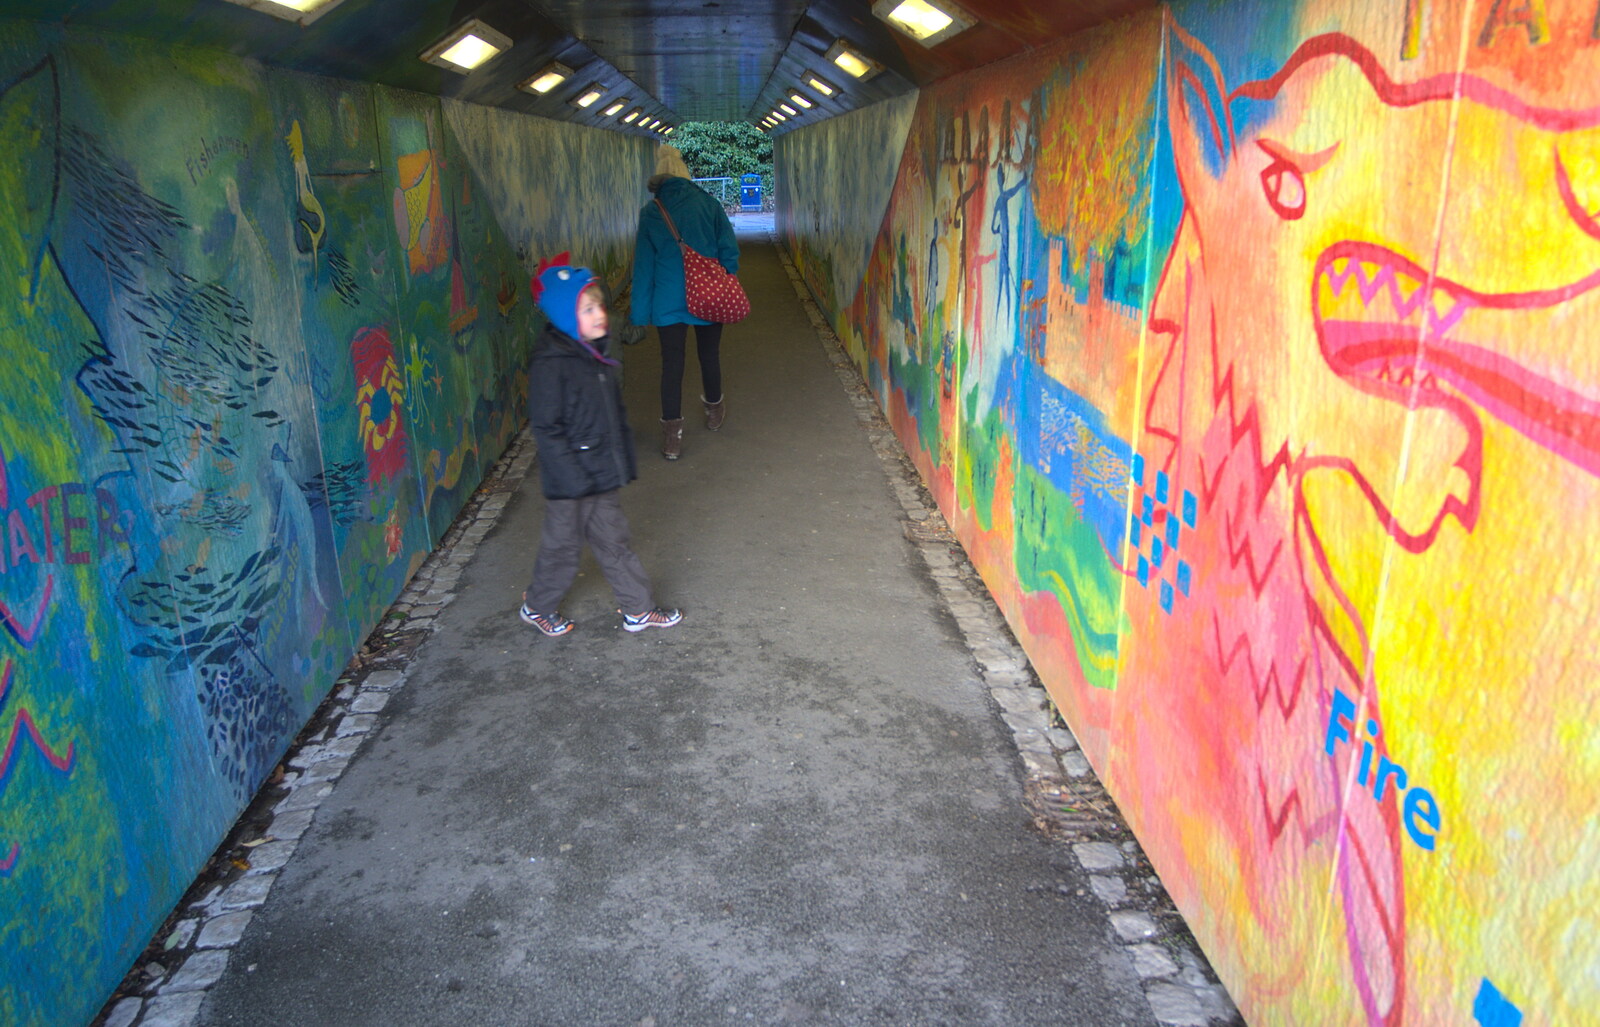 Fred and Isobel in a painted subway from Conwy, Holyhead and the Ferry to Ireland - 21st December 2015